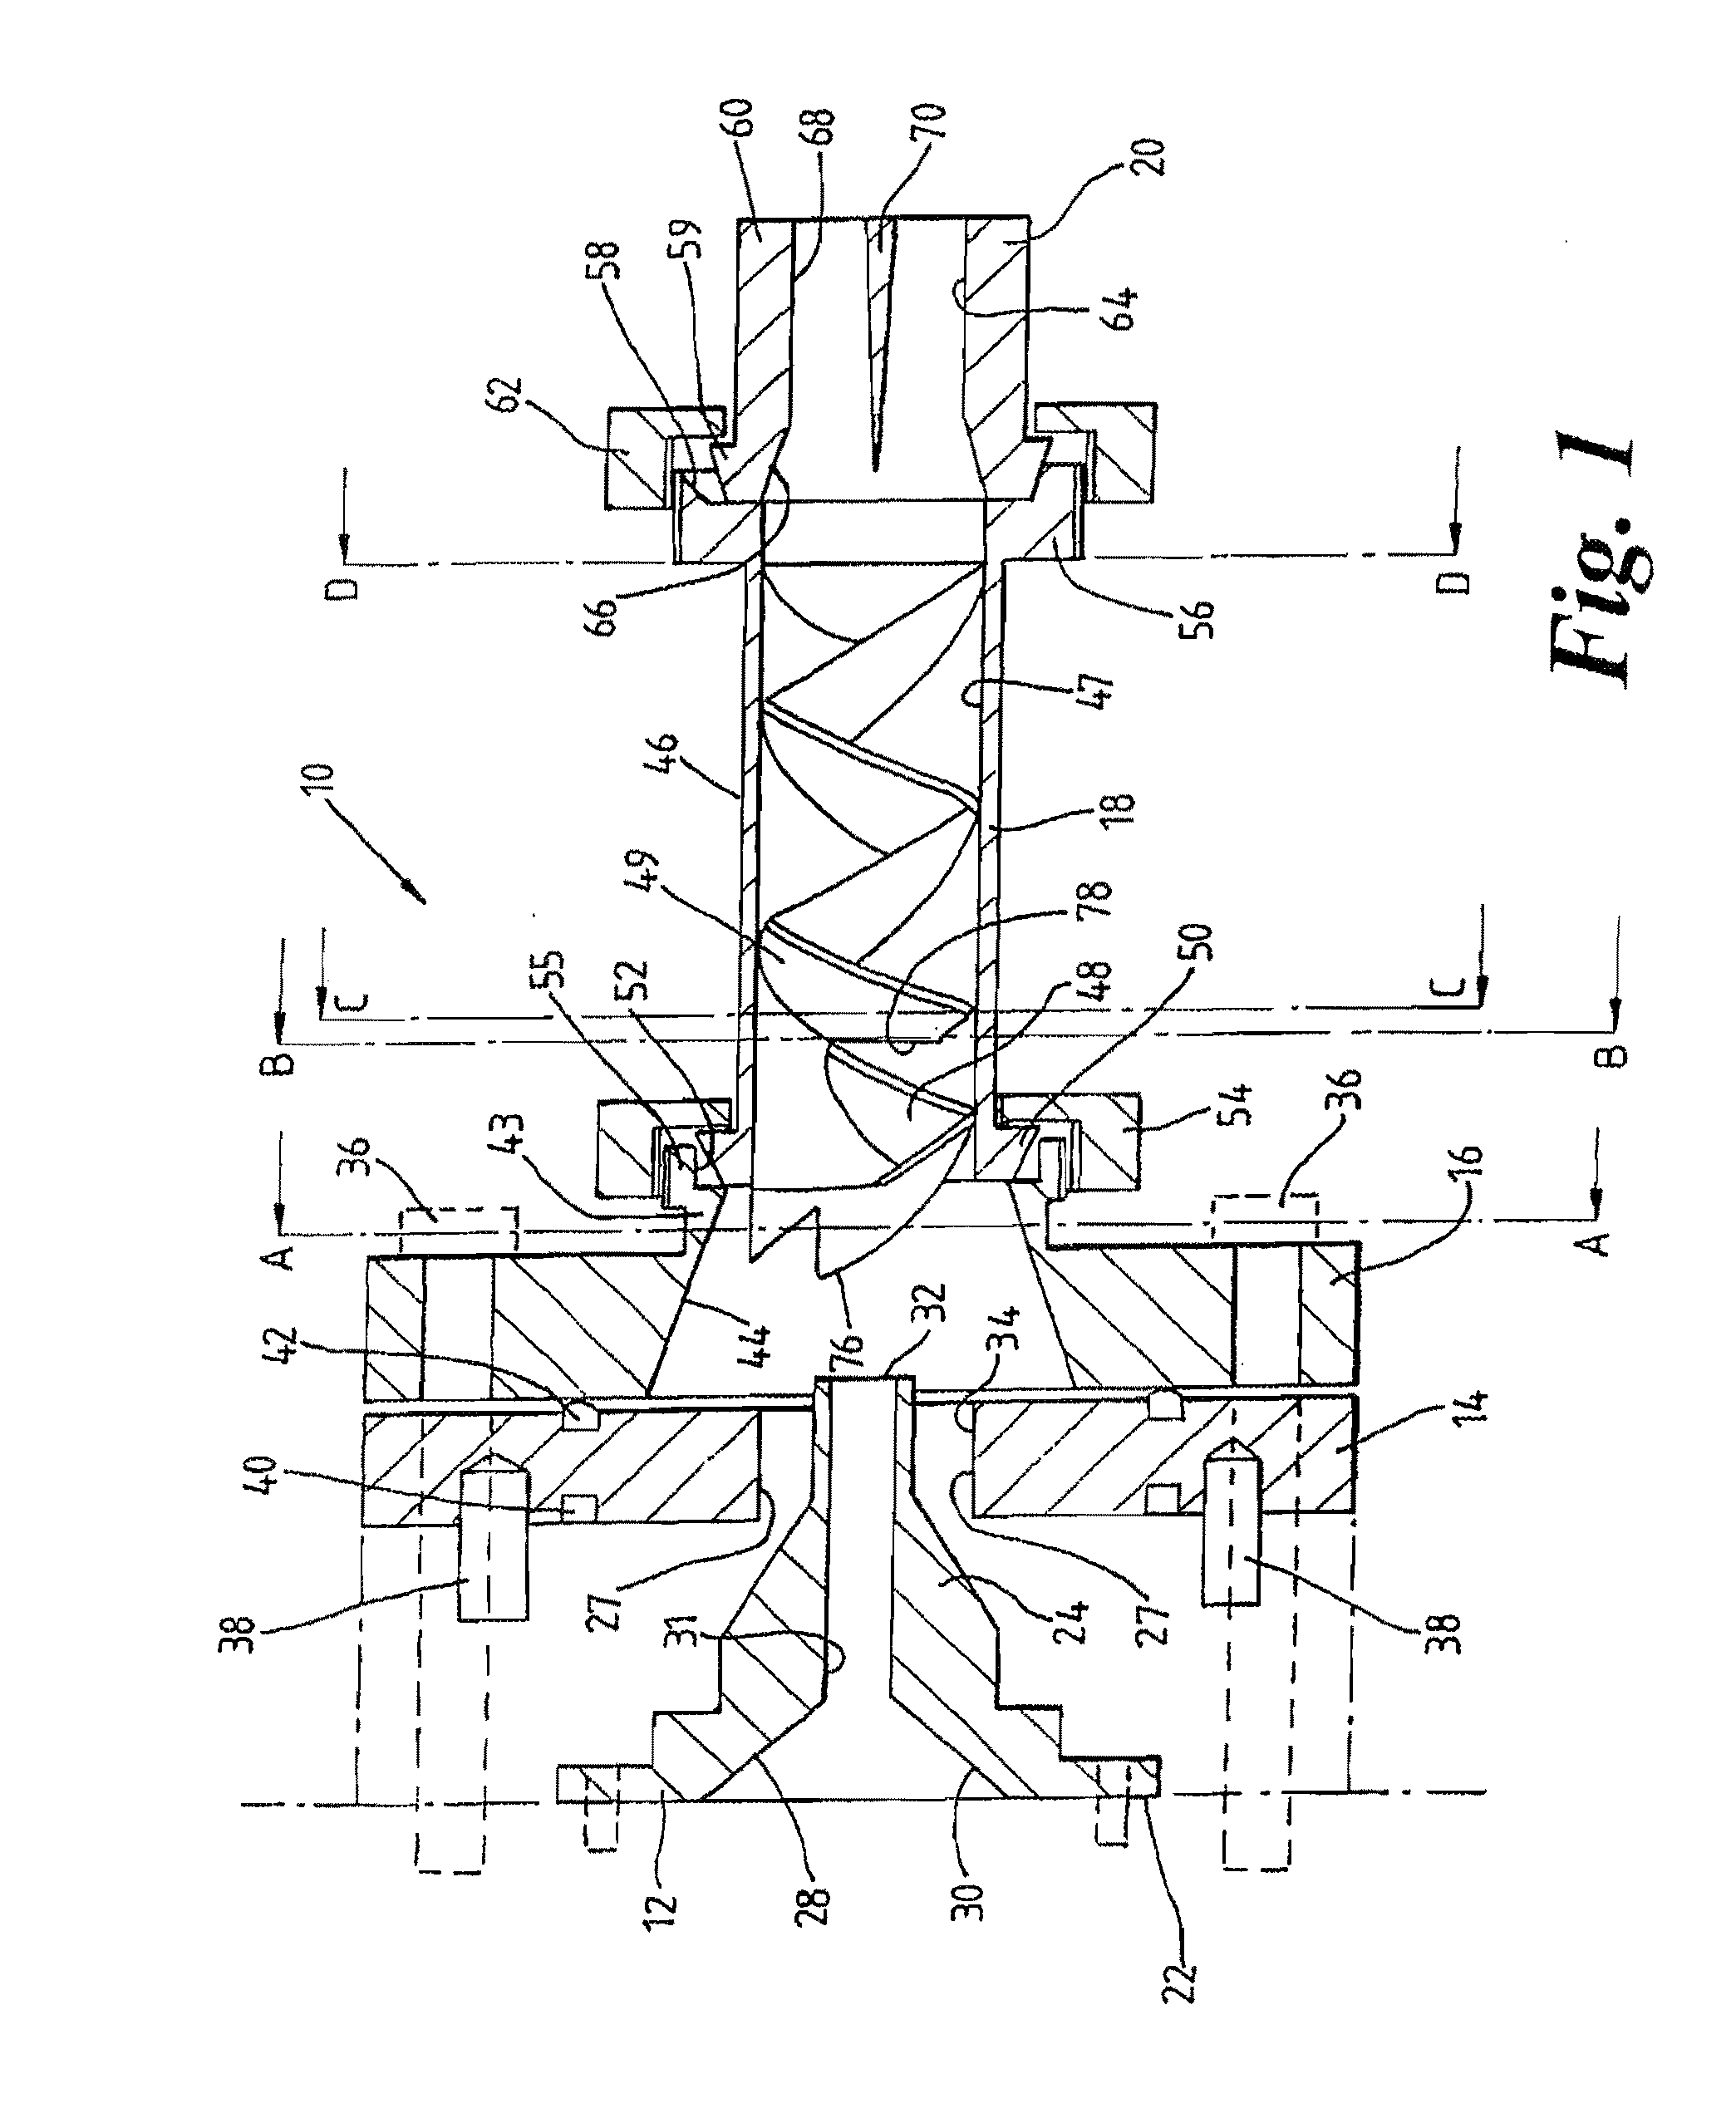 Apparatus and method for extruding a product